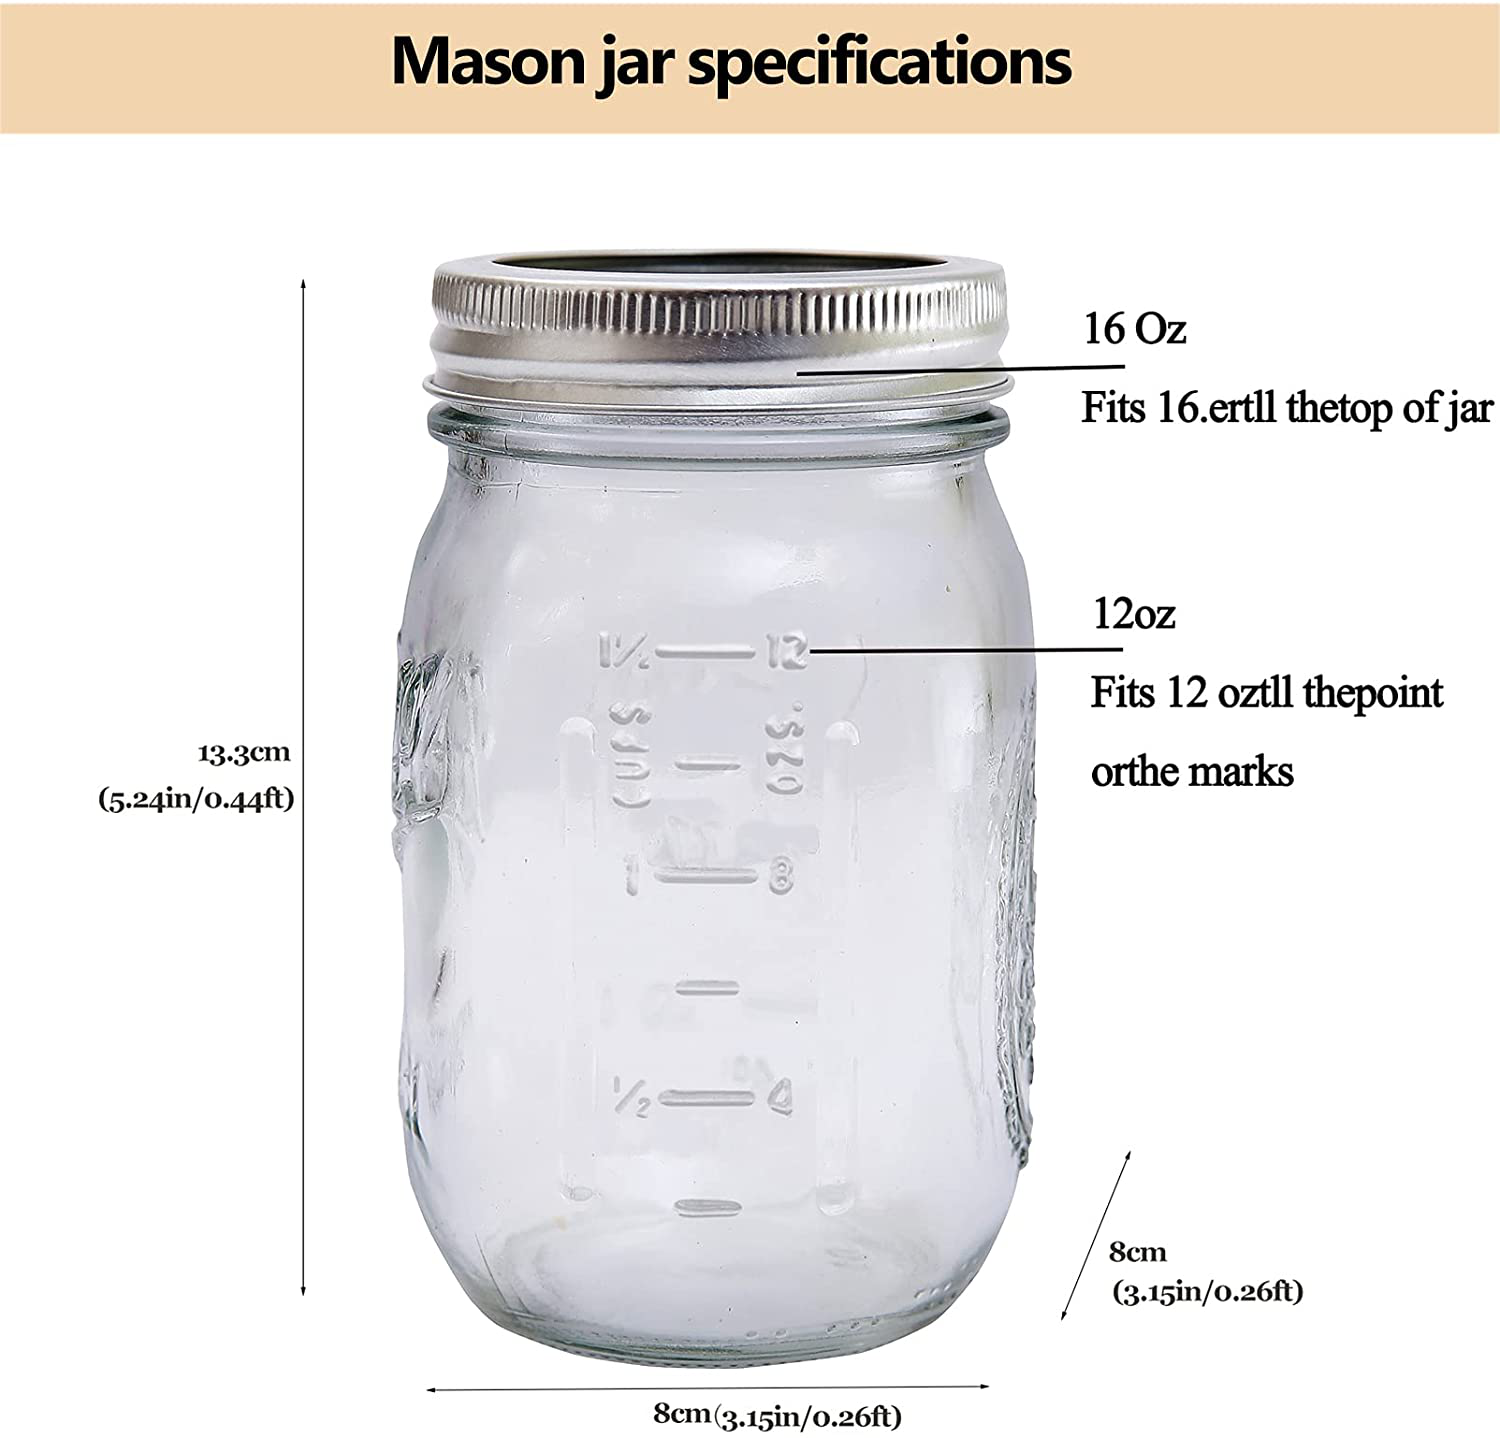 Mason Jars Regular Mouth Glass(6-Pack),16-Ounces Mason Jar,Clear Canning Jars with Lid and Band with Measurement Marks for Preserving,Meal Prep,Overnight Oats,Jam,Spice Jars